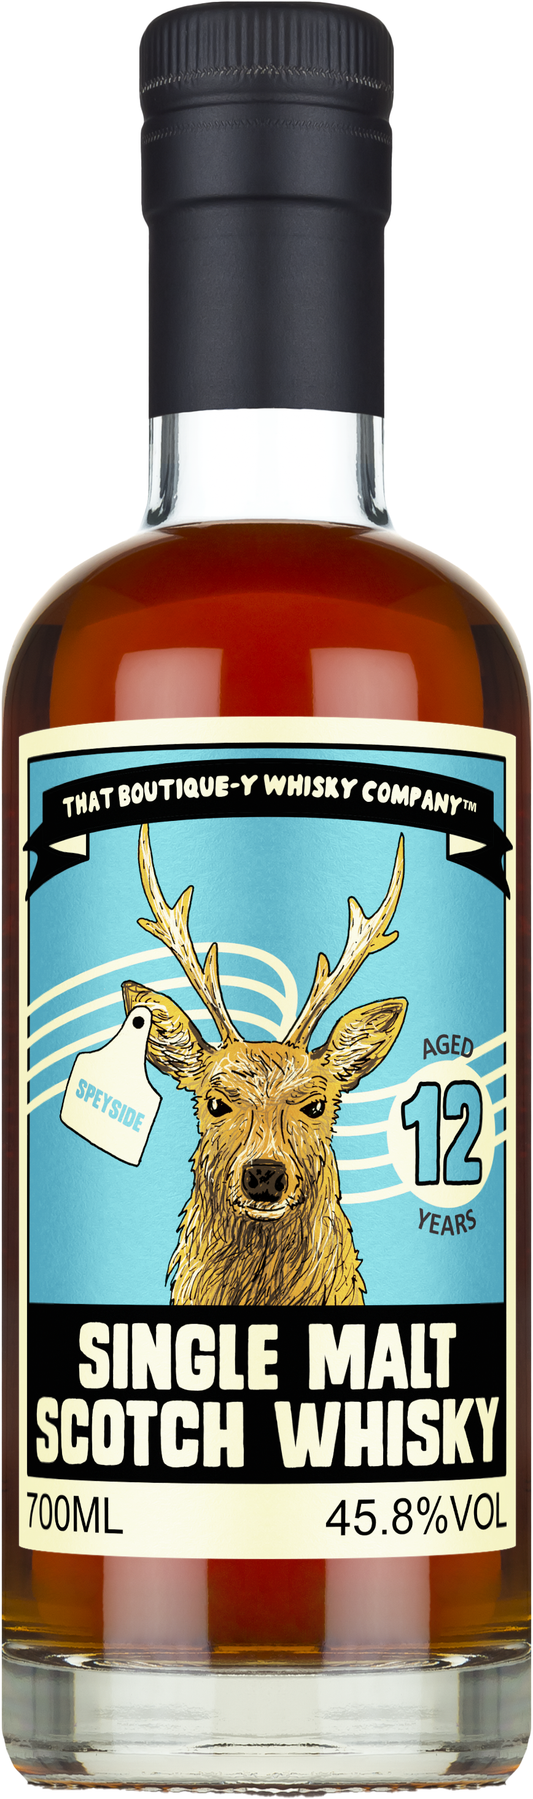 That Boutique-Y Whisky Company 12 Year Old Speyside Single Malt Scotch Whisky 700ml